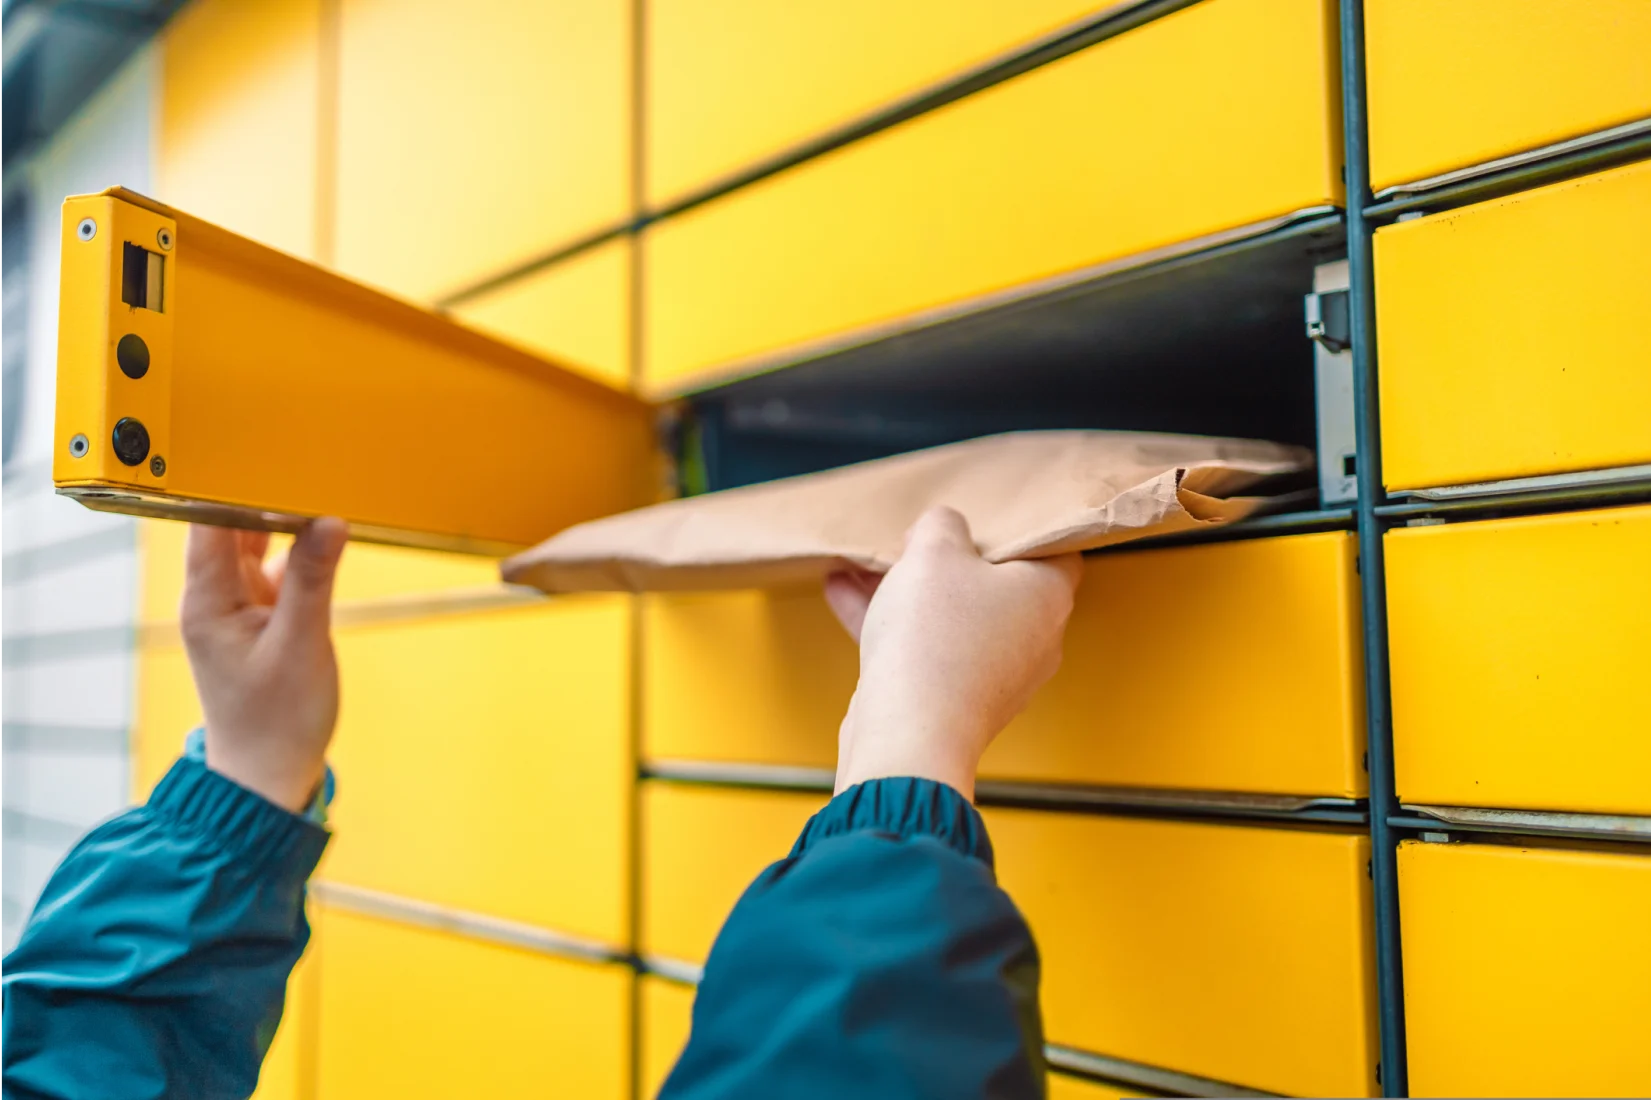 Close up on someone depositing parcel into yellow InPost locker